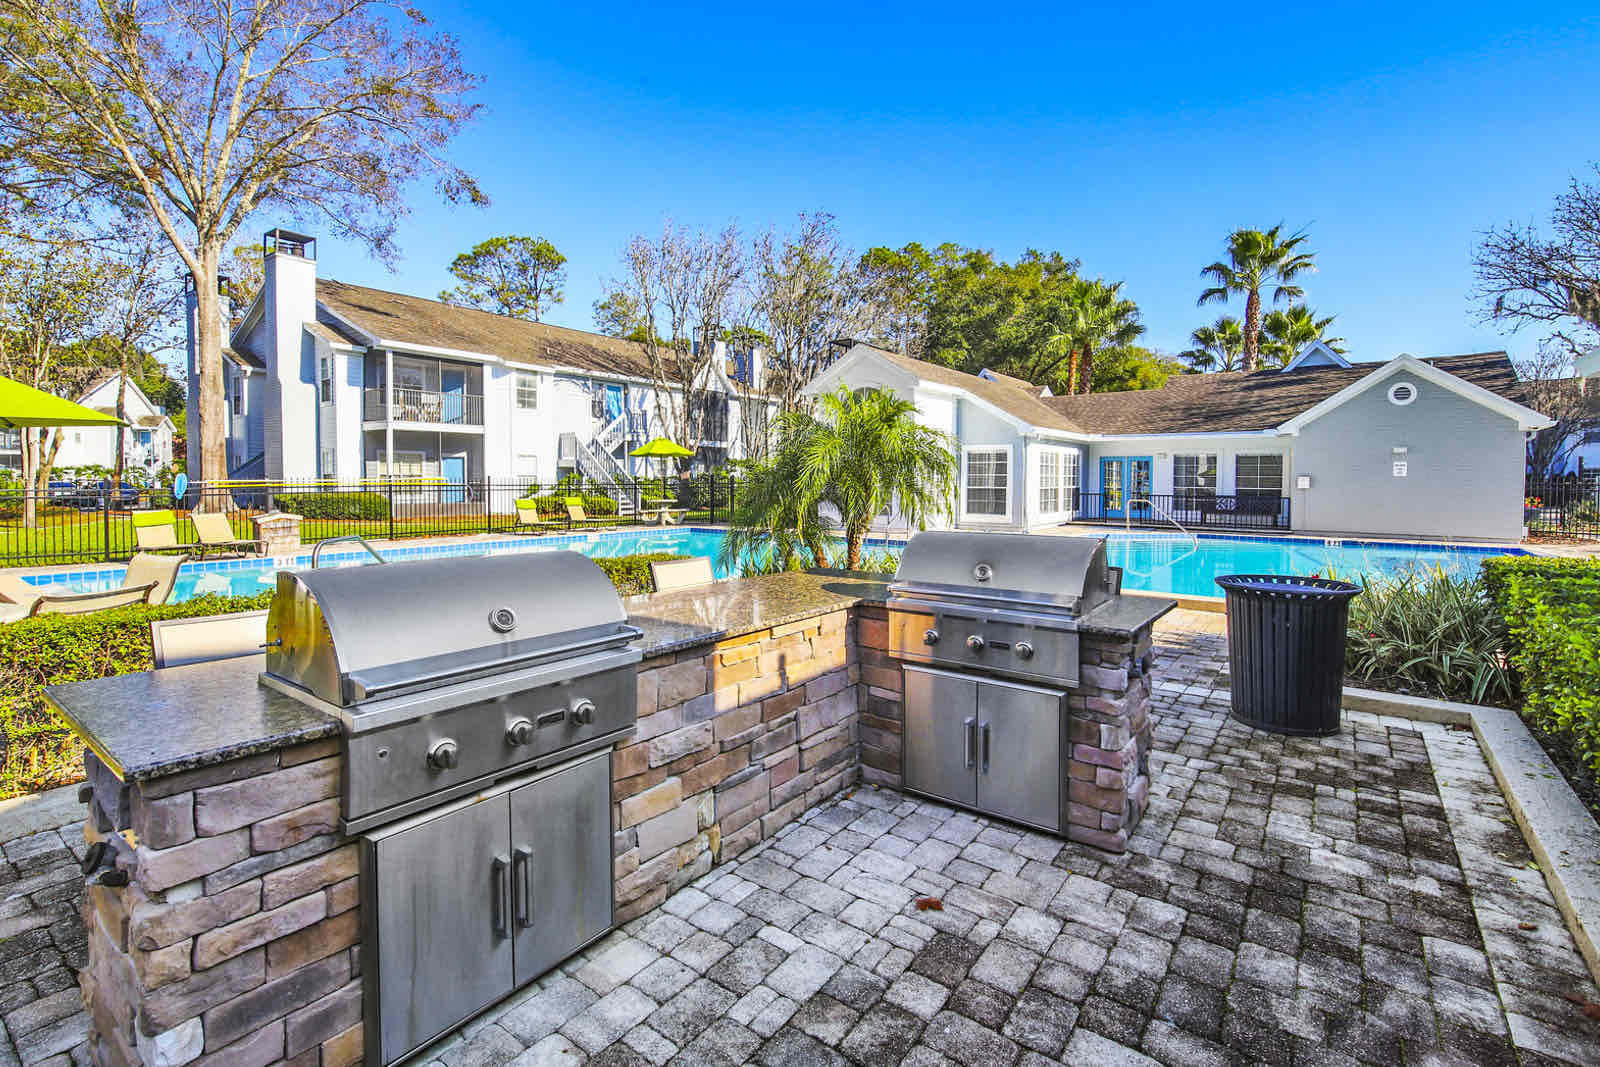 outdoor grill space with two gas grills adjacent the pool